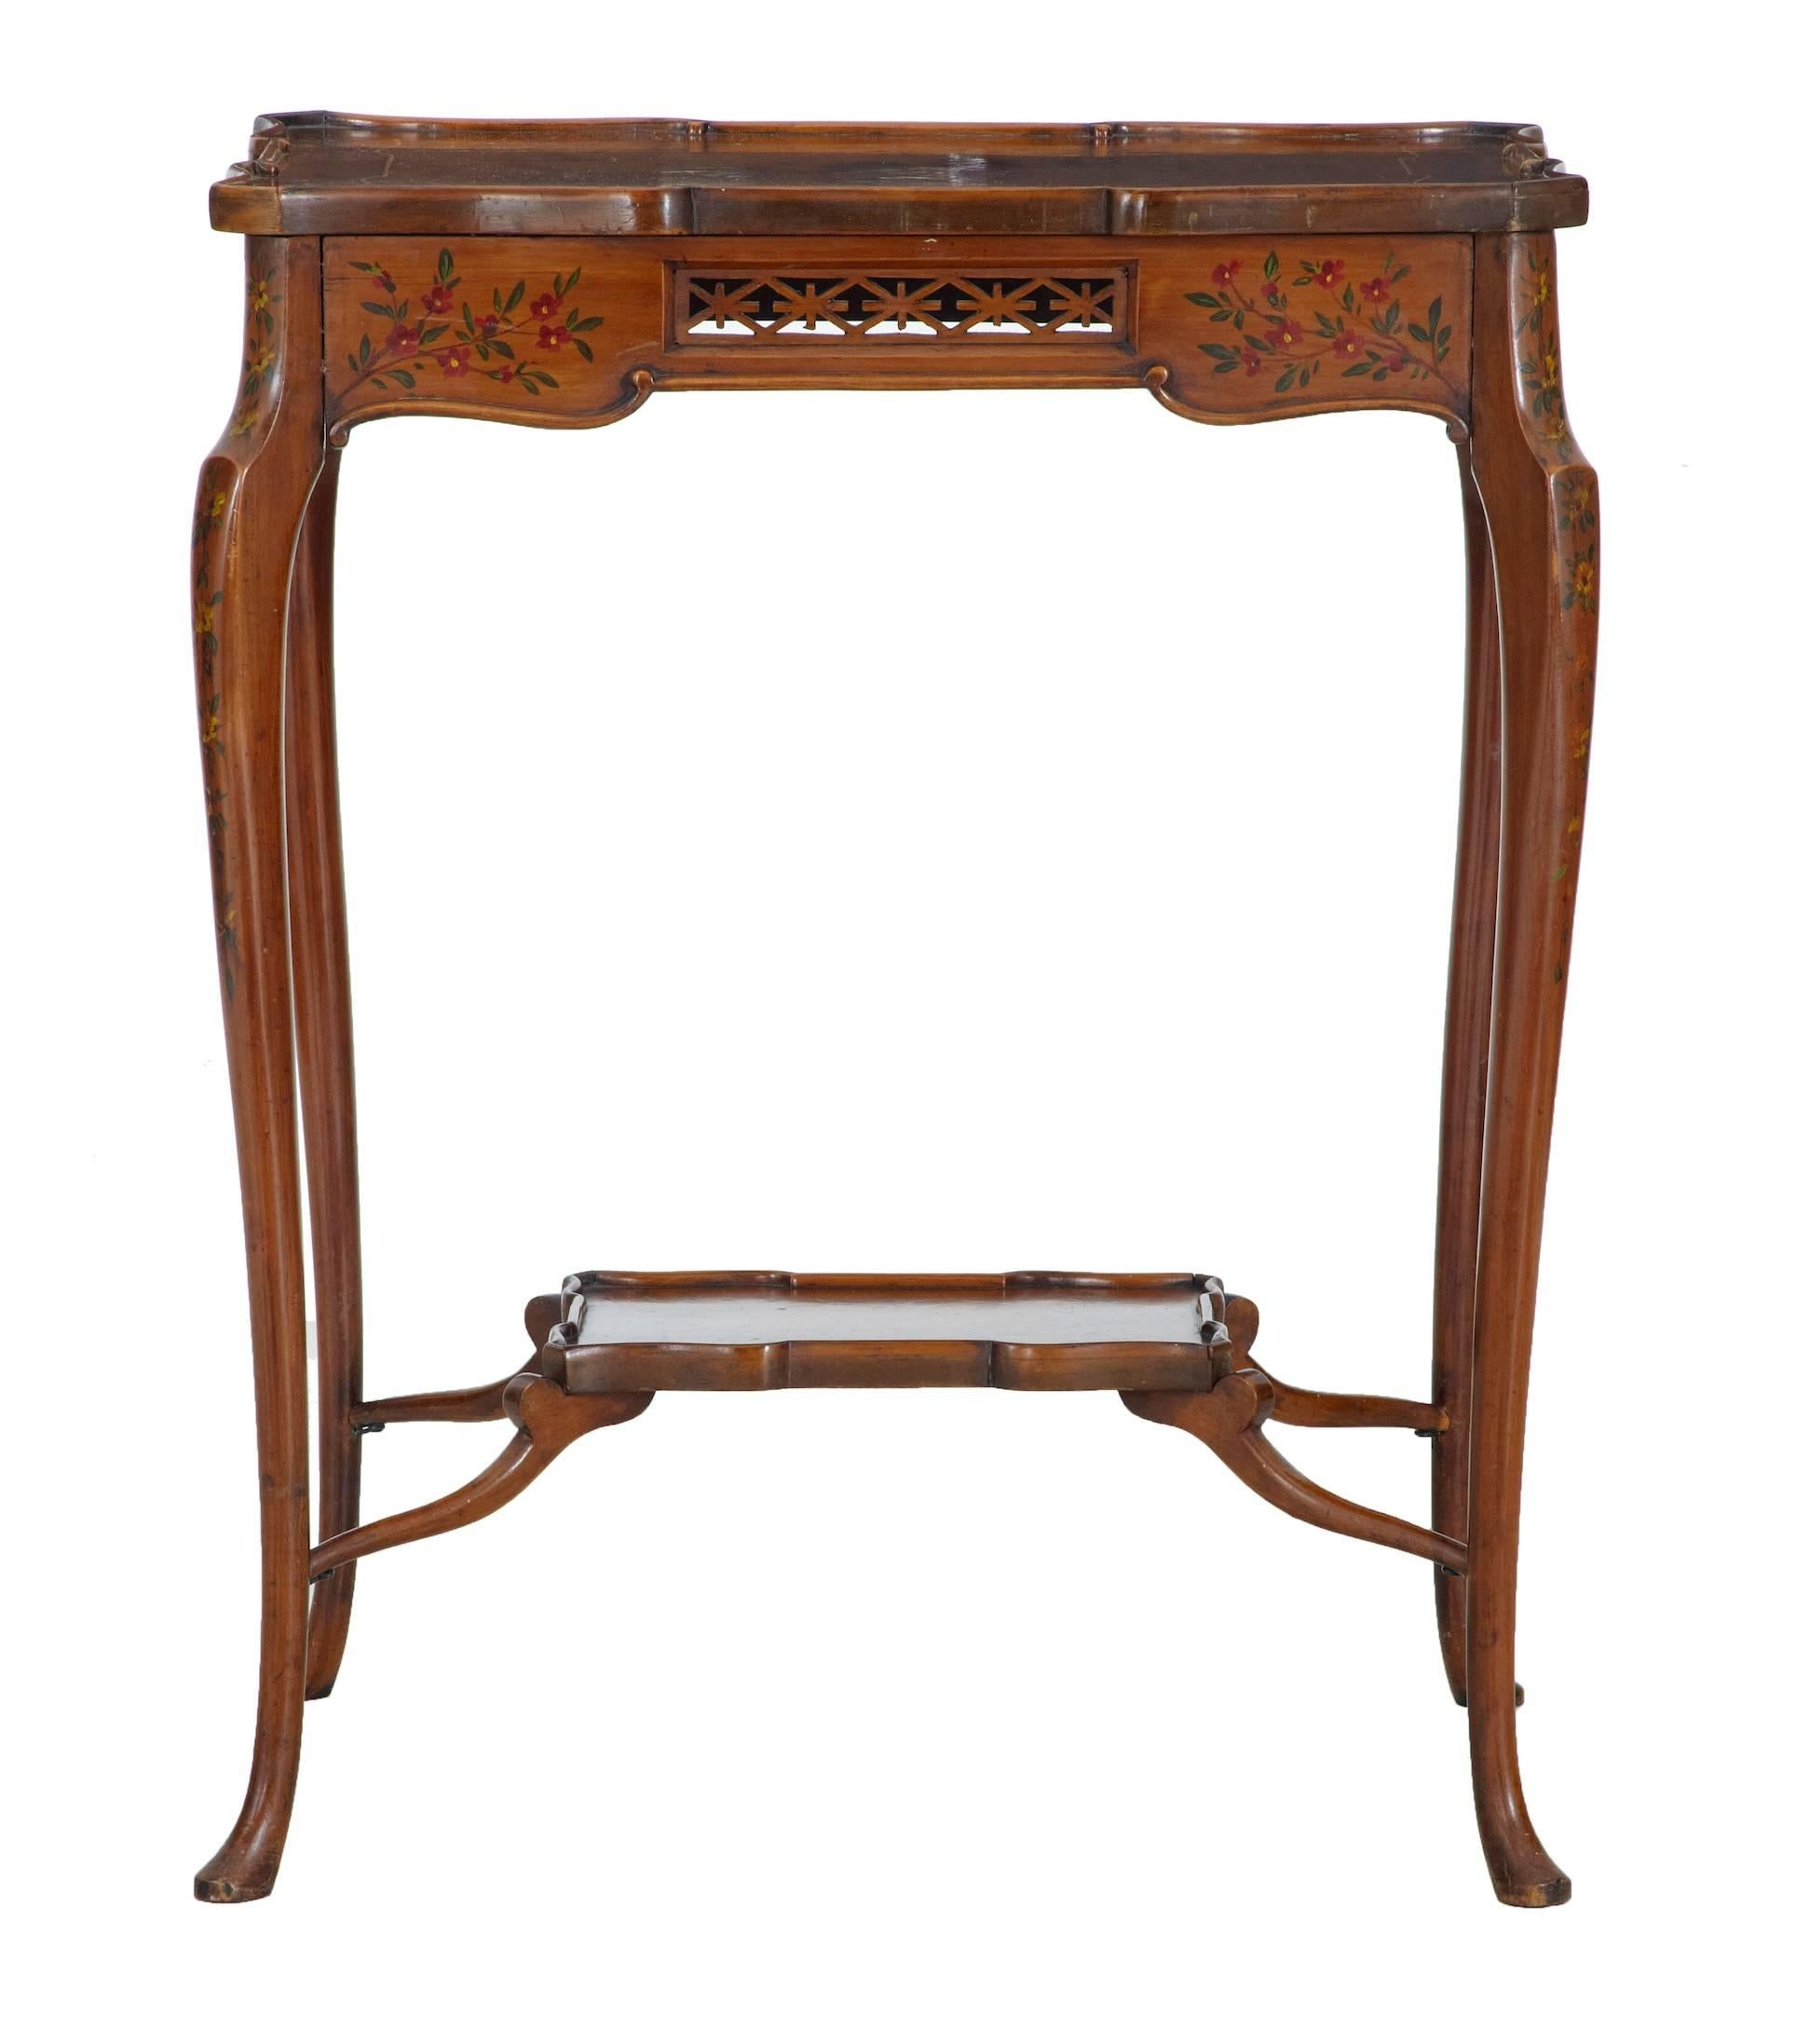 European Early 20th Century Sheraton Revival Satinwood Side Table